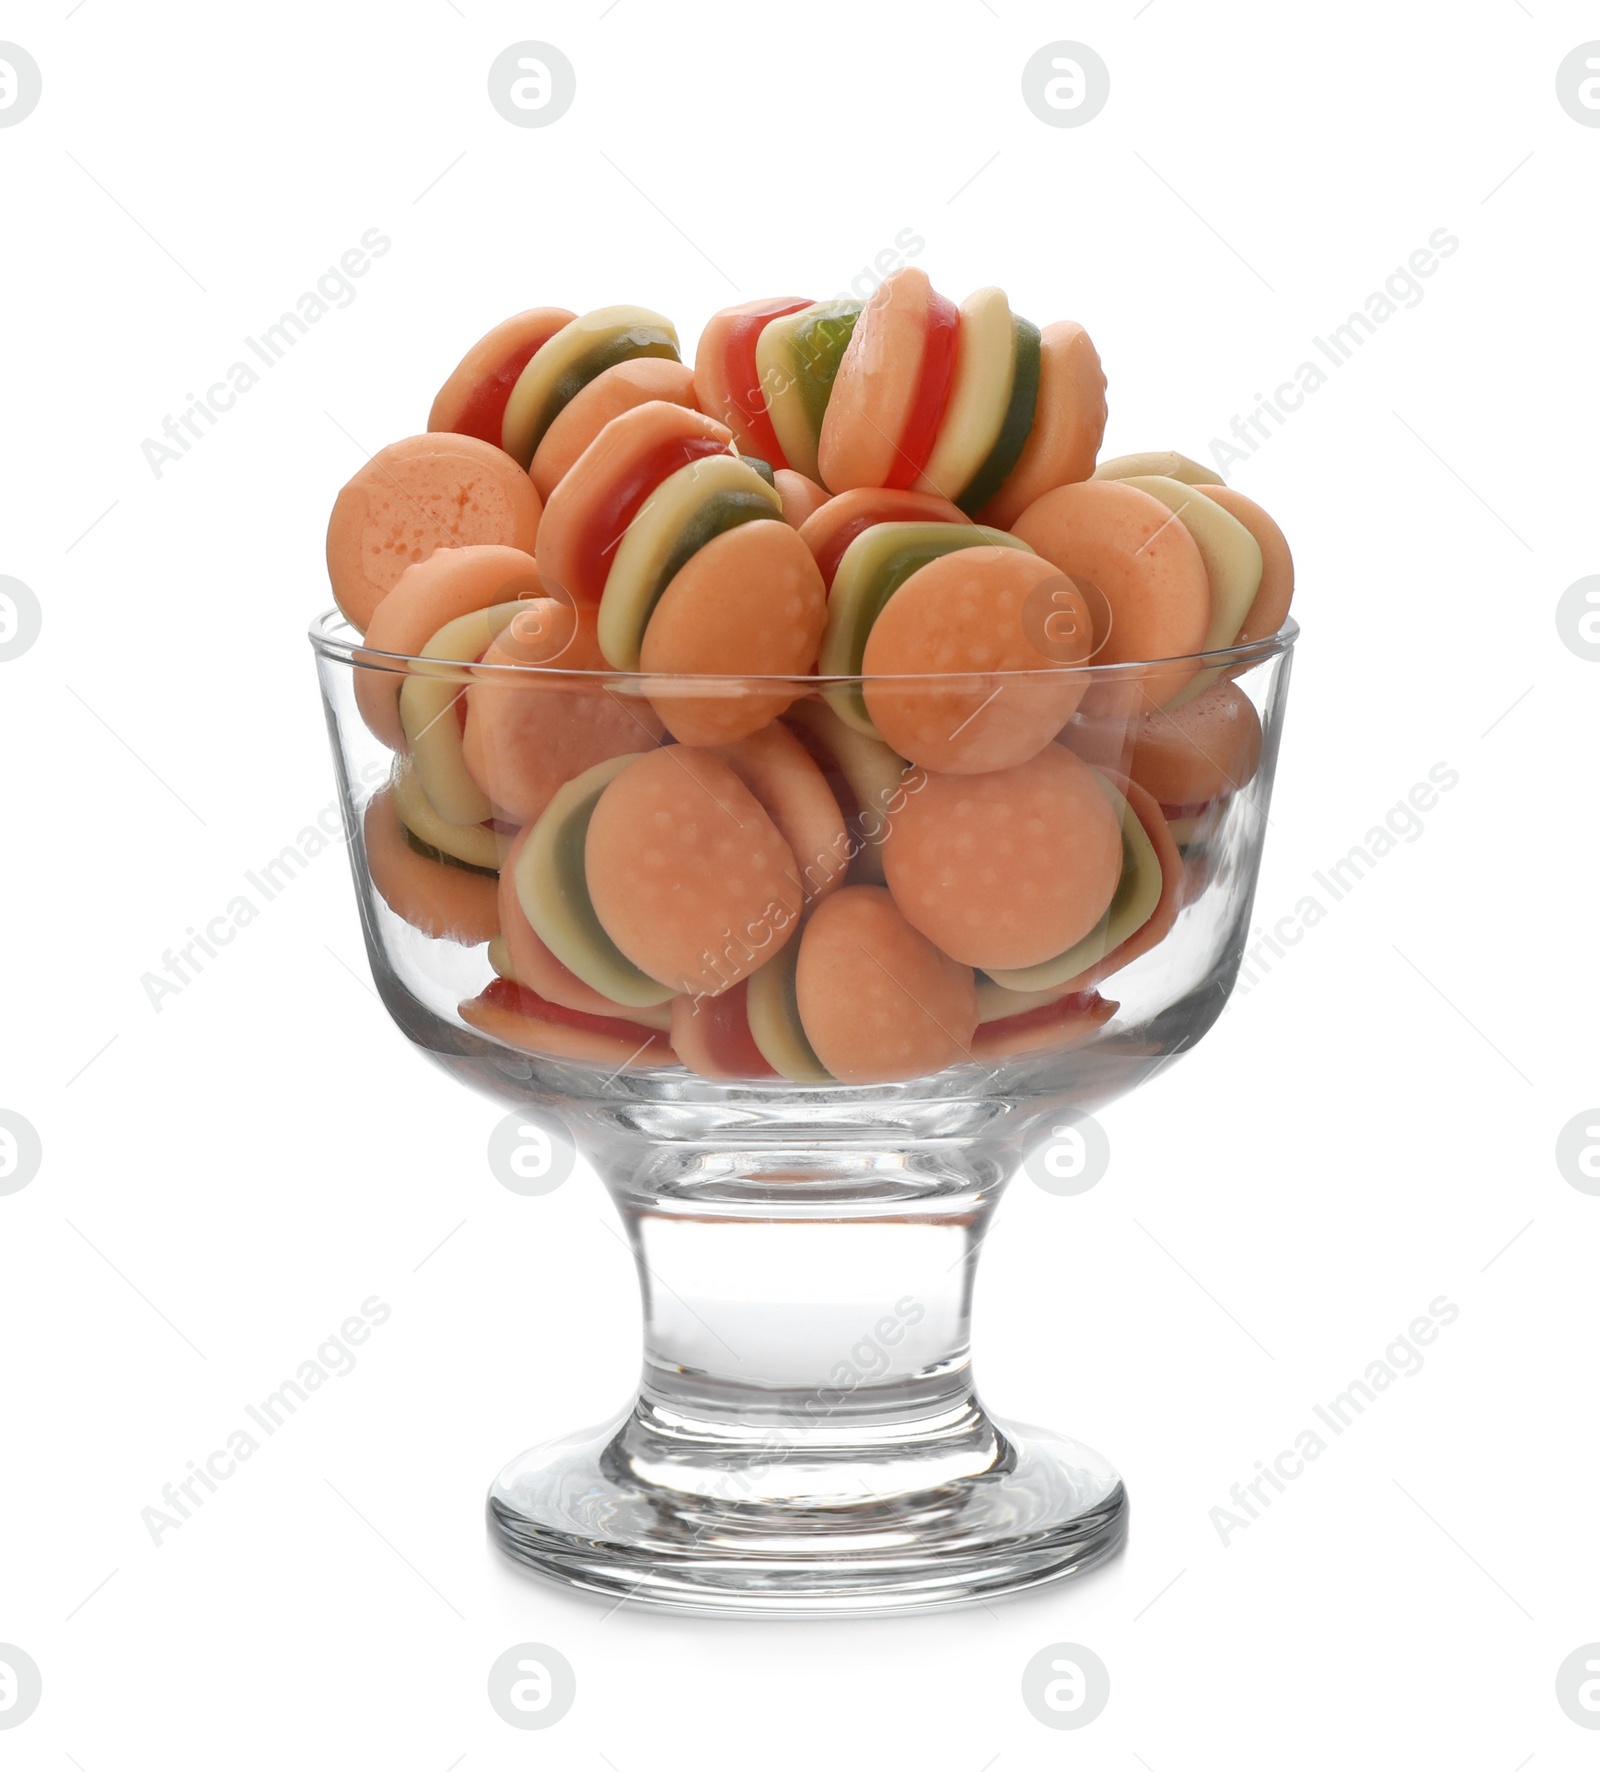 Photo of Glass with jelly candies in shape of burger on white background